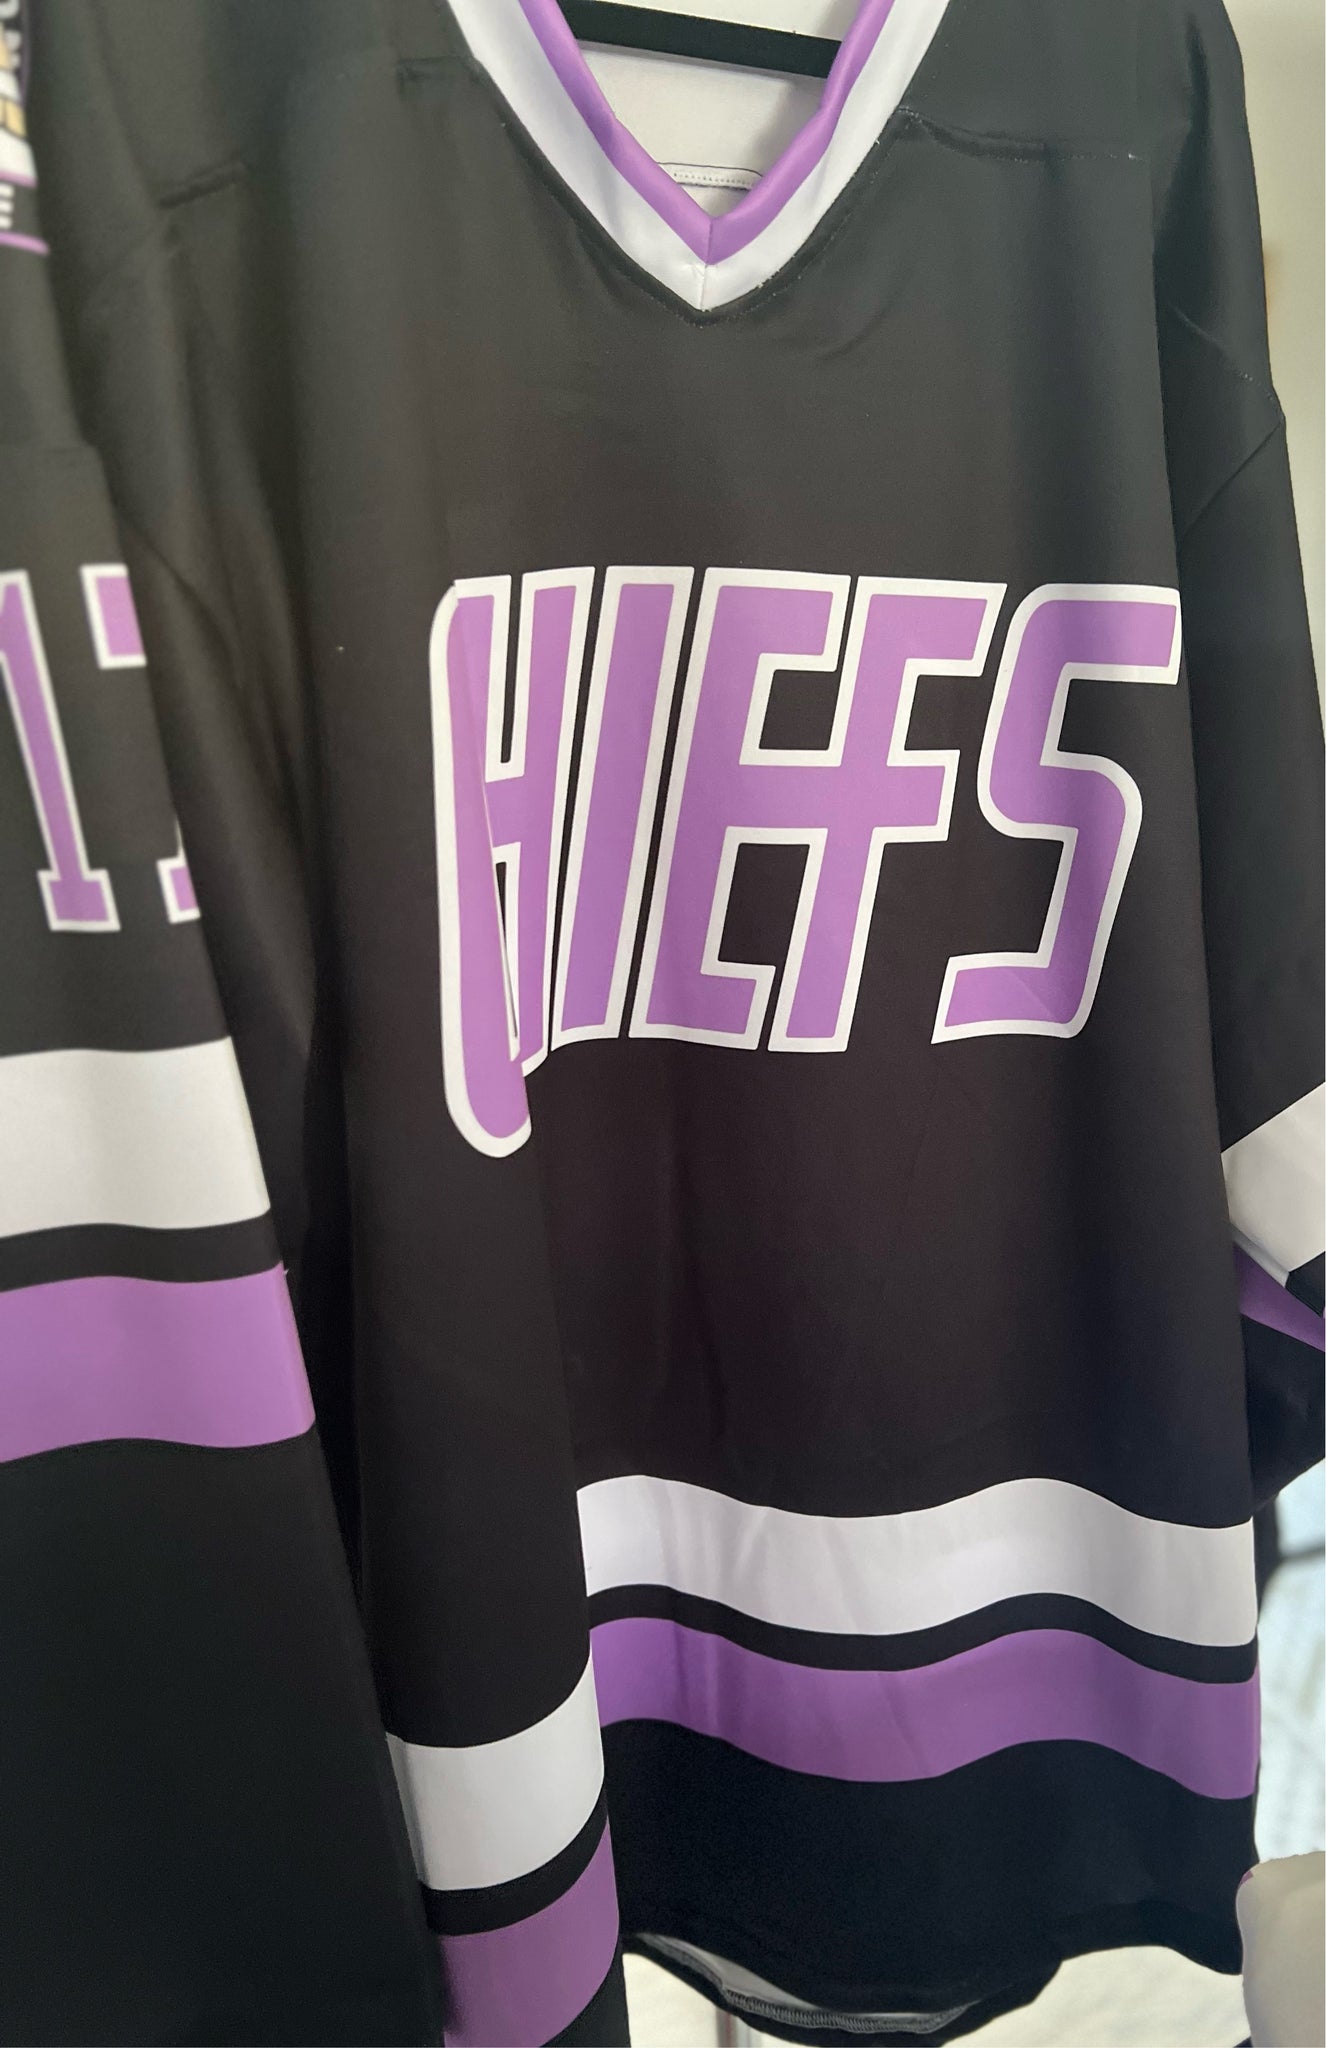 Hockey Fights Cancer Warm-Up Jersey Autographed and Worn by #93